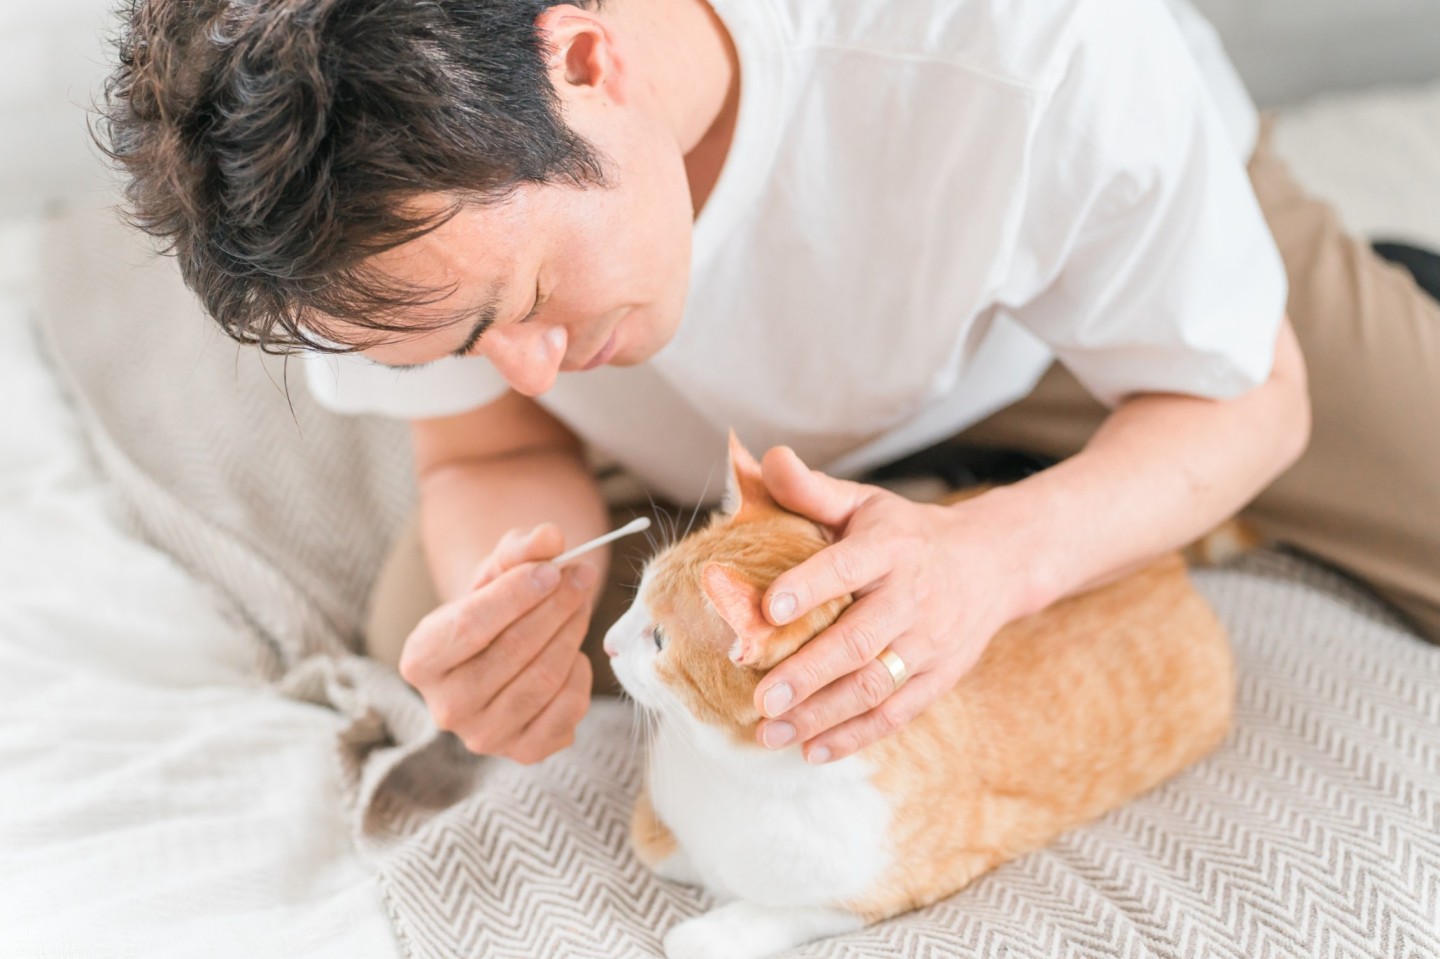 A man disinfecting a cat's ears with a Q-tip